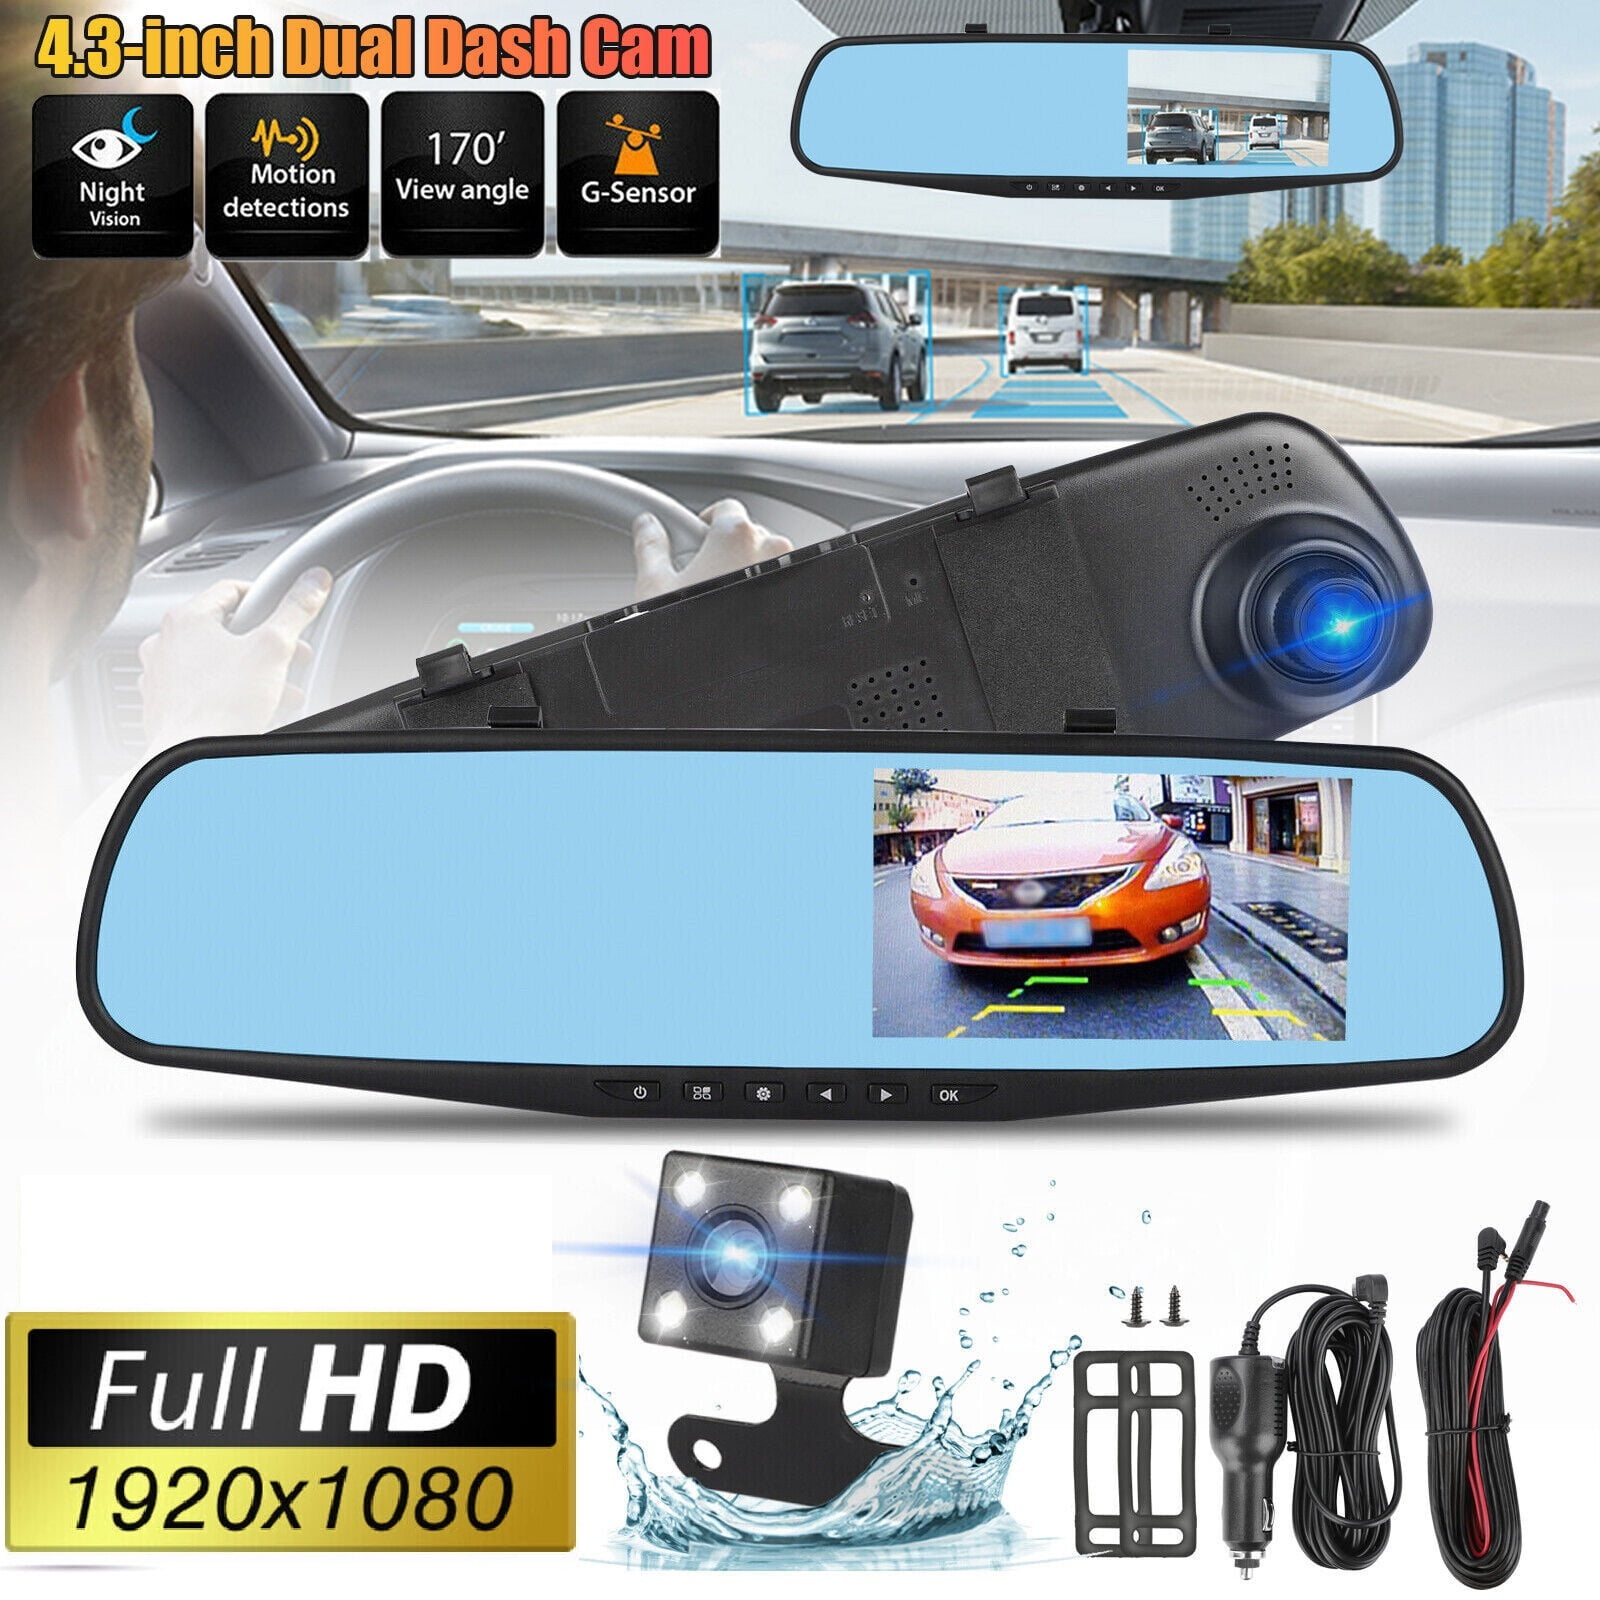 Dash Cam Front and Rear Inside 3 Channel, Free 64GB SD Card, 1080P Dash  Camera for Car with 4 IR Lamps, Three Way Car Cam Super Night Vision, 2.5  Inch